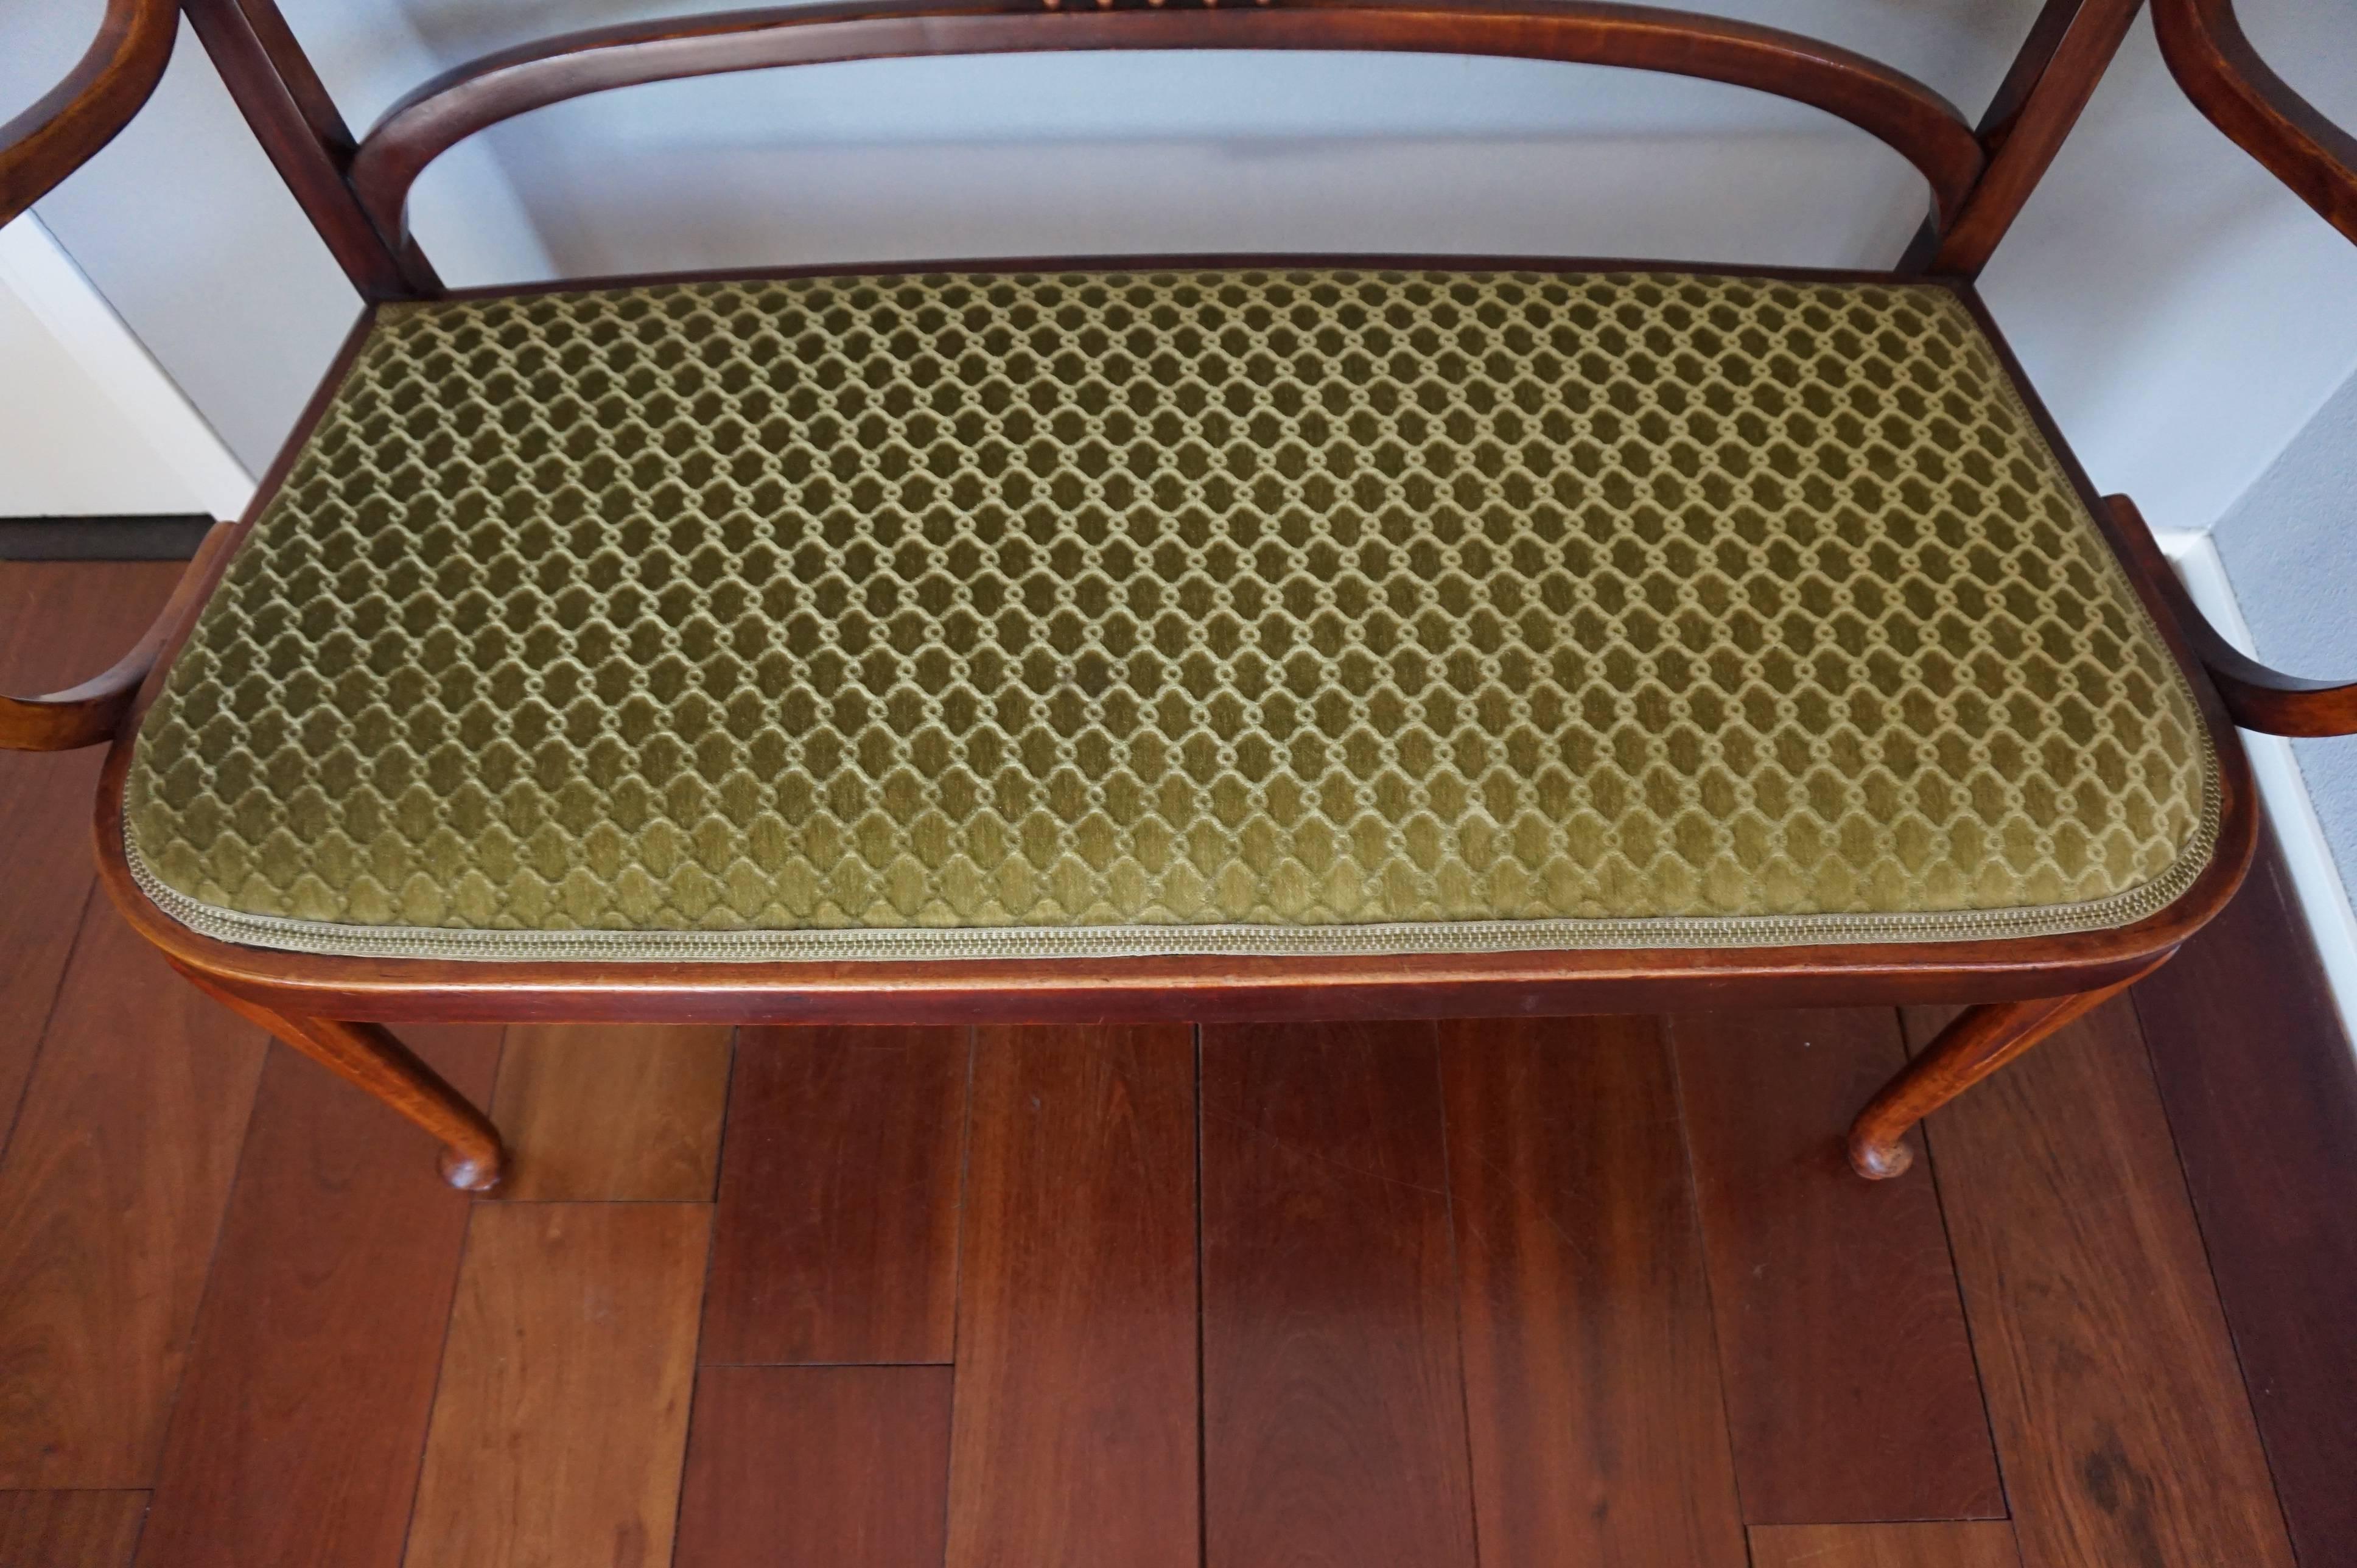 Austrian Antique Bentwood Thonet Settee / Bench Great Condition & Beautifully Upholstered